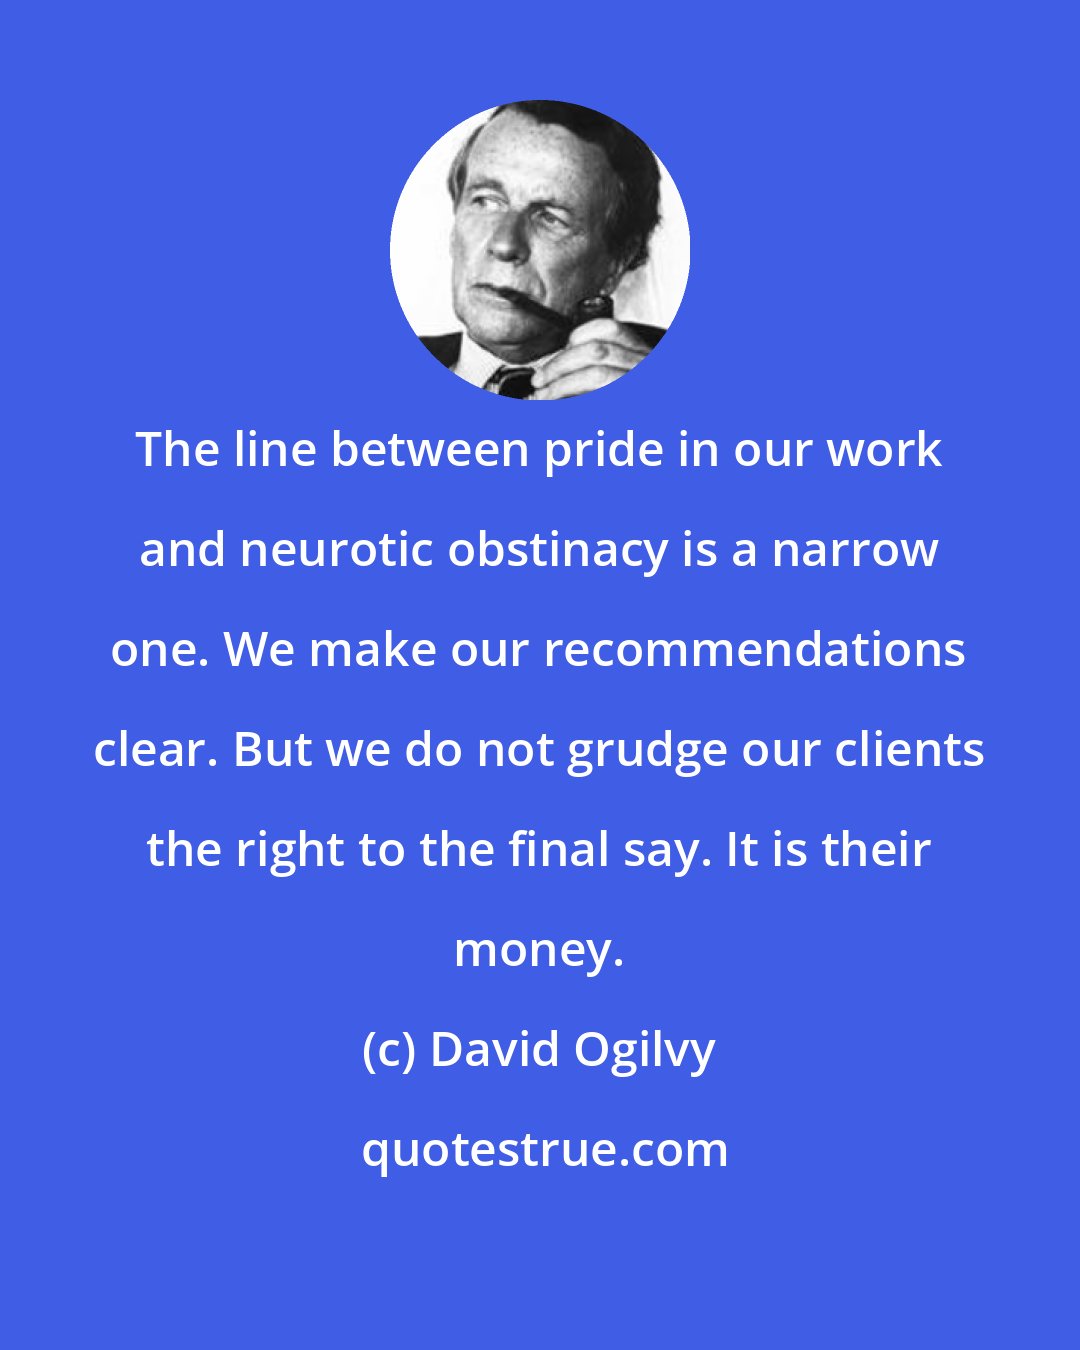 David Ogilvy: The line between pride in our work and neurotic obstinacy is a narrow one. We make our recommendations clear. But we do not grudge our clients the right to the final say. It is their money.